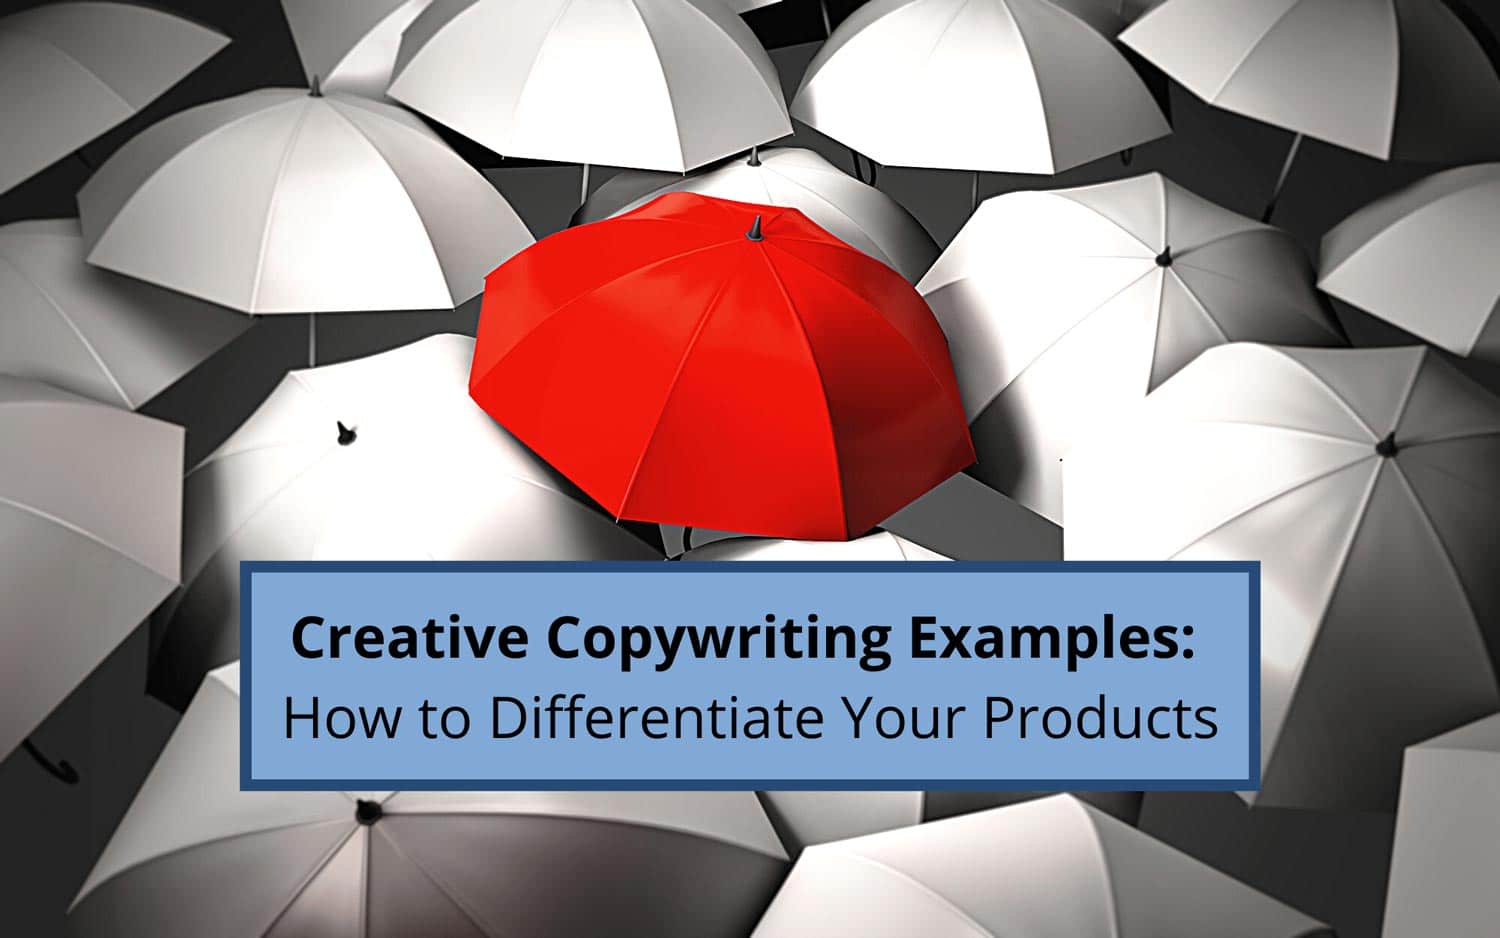 Creative Copywriting Examples: How to Differentiate Your Products